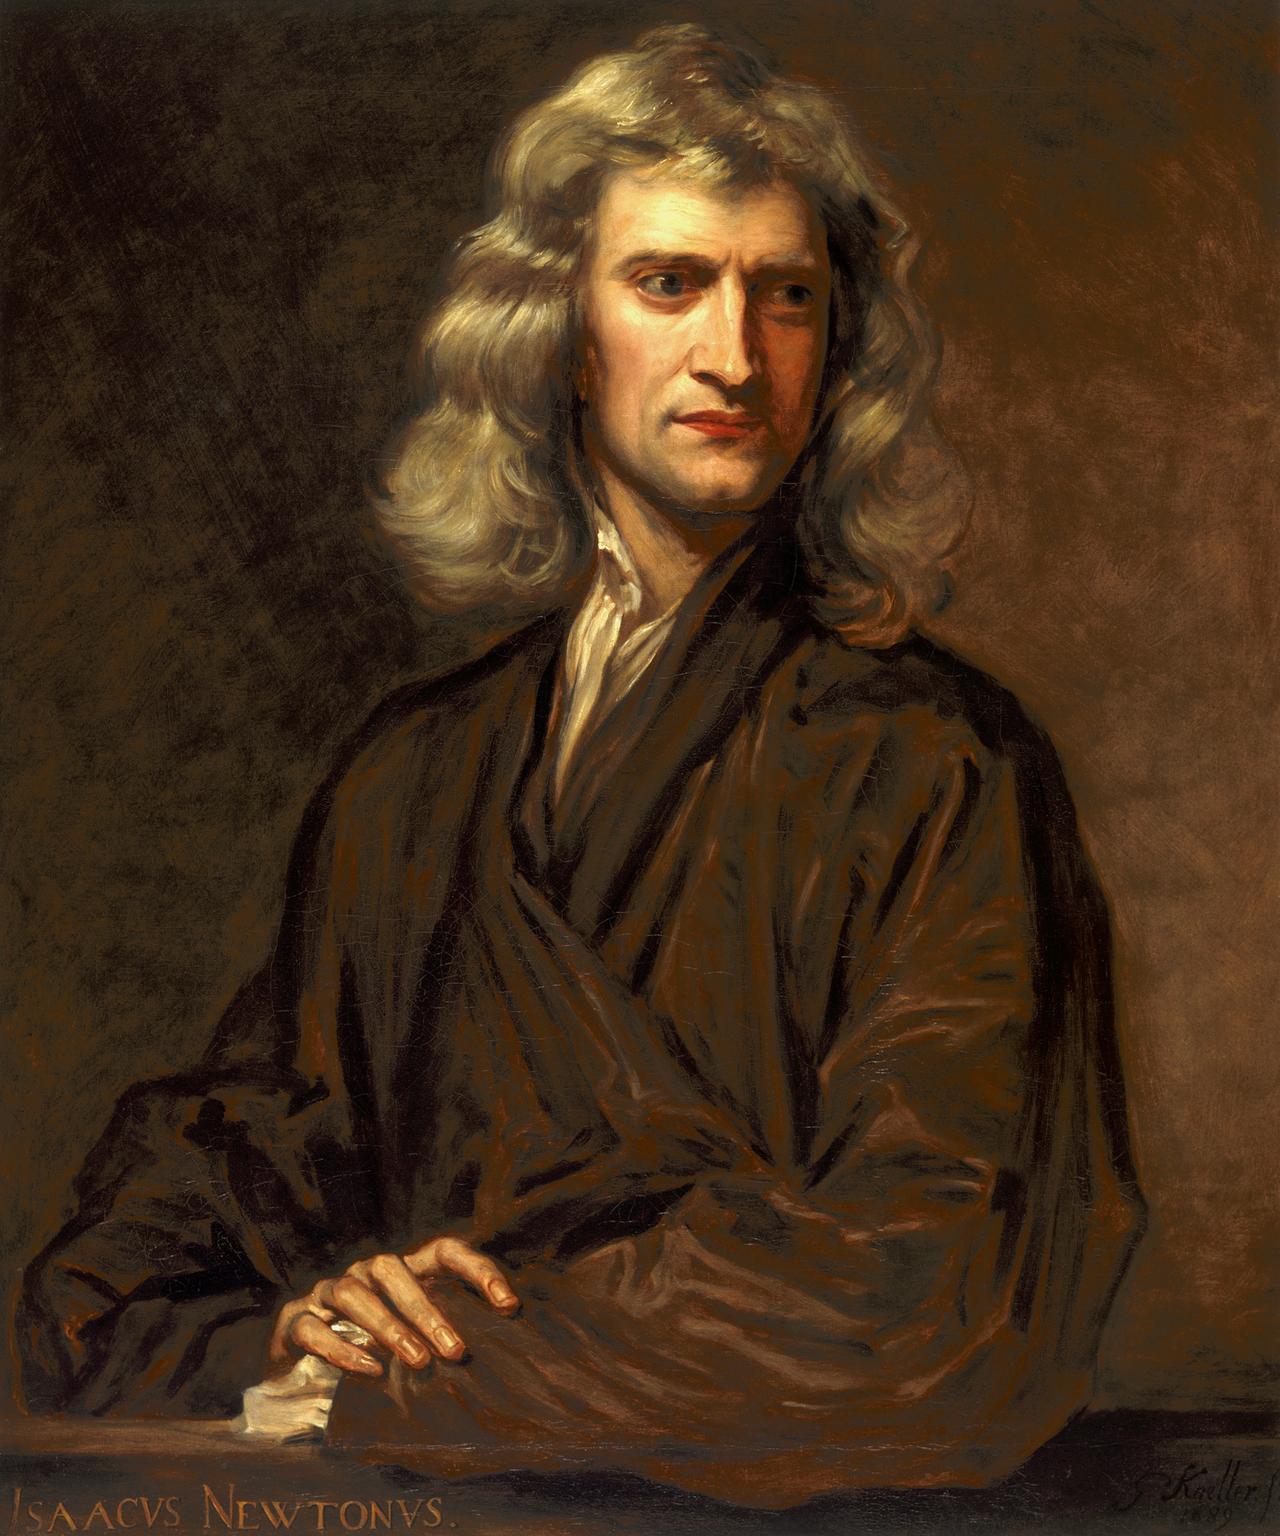 Painting of Isaac Newton copied from the original of 1689 by Sir Godfrey Kneller. Isaac Newton looking slightly to right, natural hair, shirt open at neck, brown gown loosely wrapped, right hand resting over left arm.